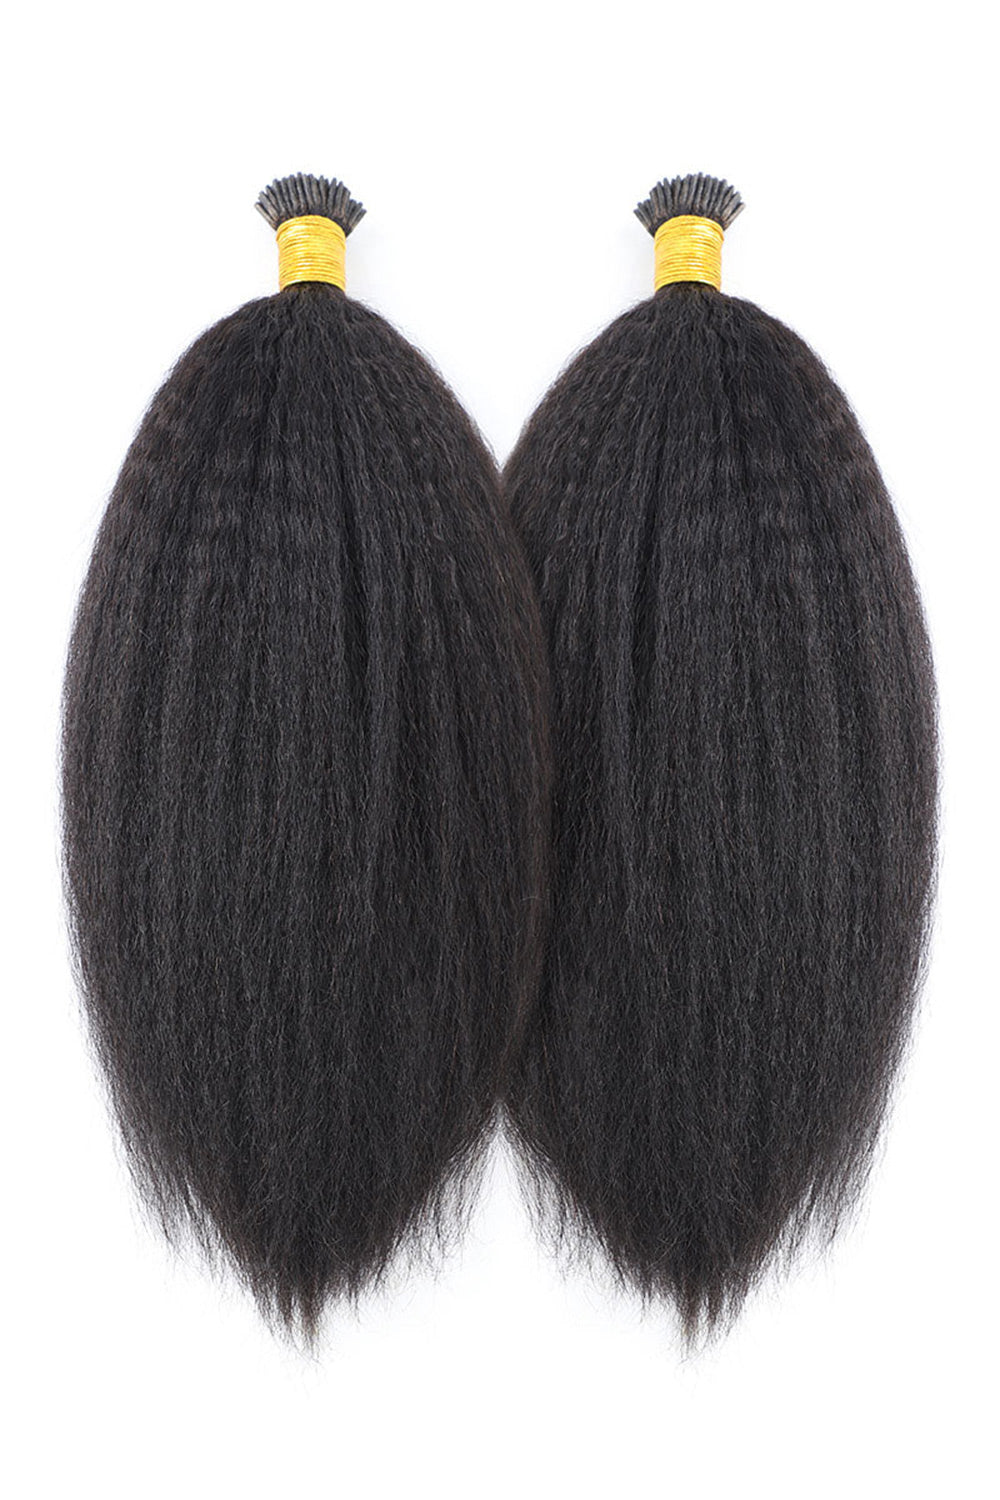 I Tip Black Hair Kinky Straight Remy Human Hair Extensions